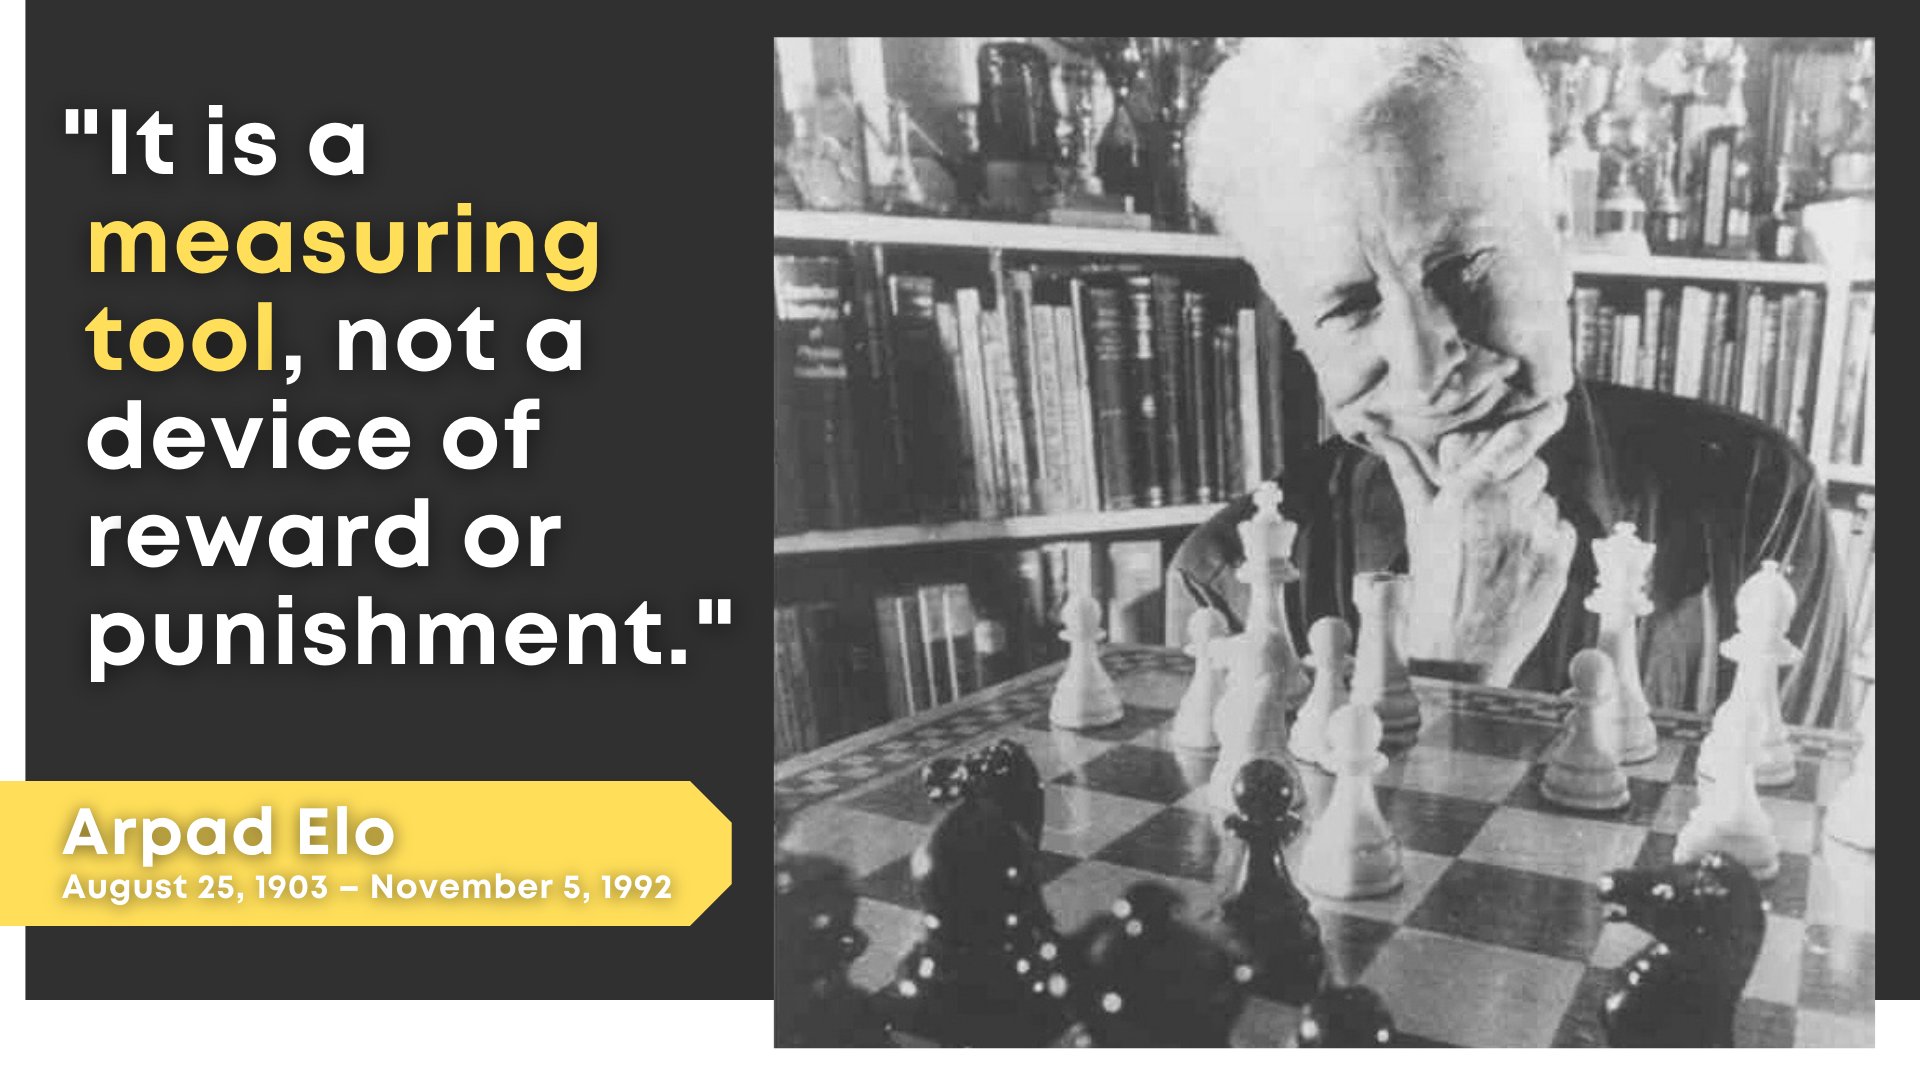 International Chess Federation on Twitter: "Today marks 118 years since the  birthday of Arpad Elo. He was a professor in physics, a chess master, and  the creator of the Elo rating system,